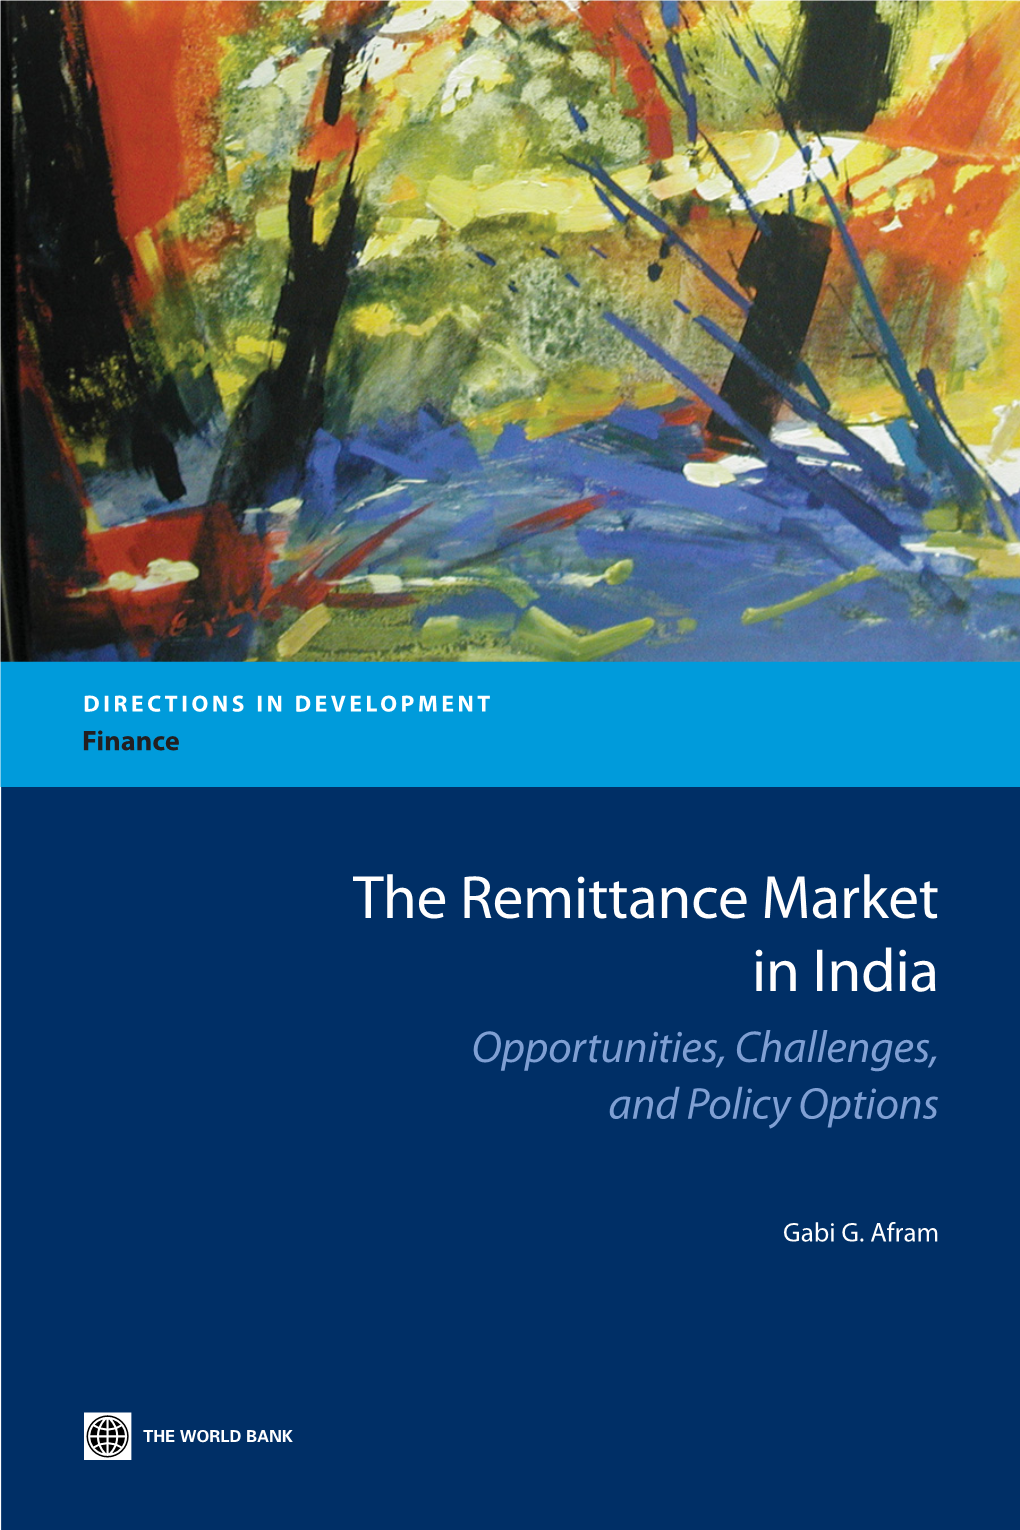 The Remittance Market in India Opportunities, Challenges, and Policy Options